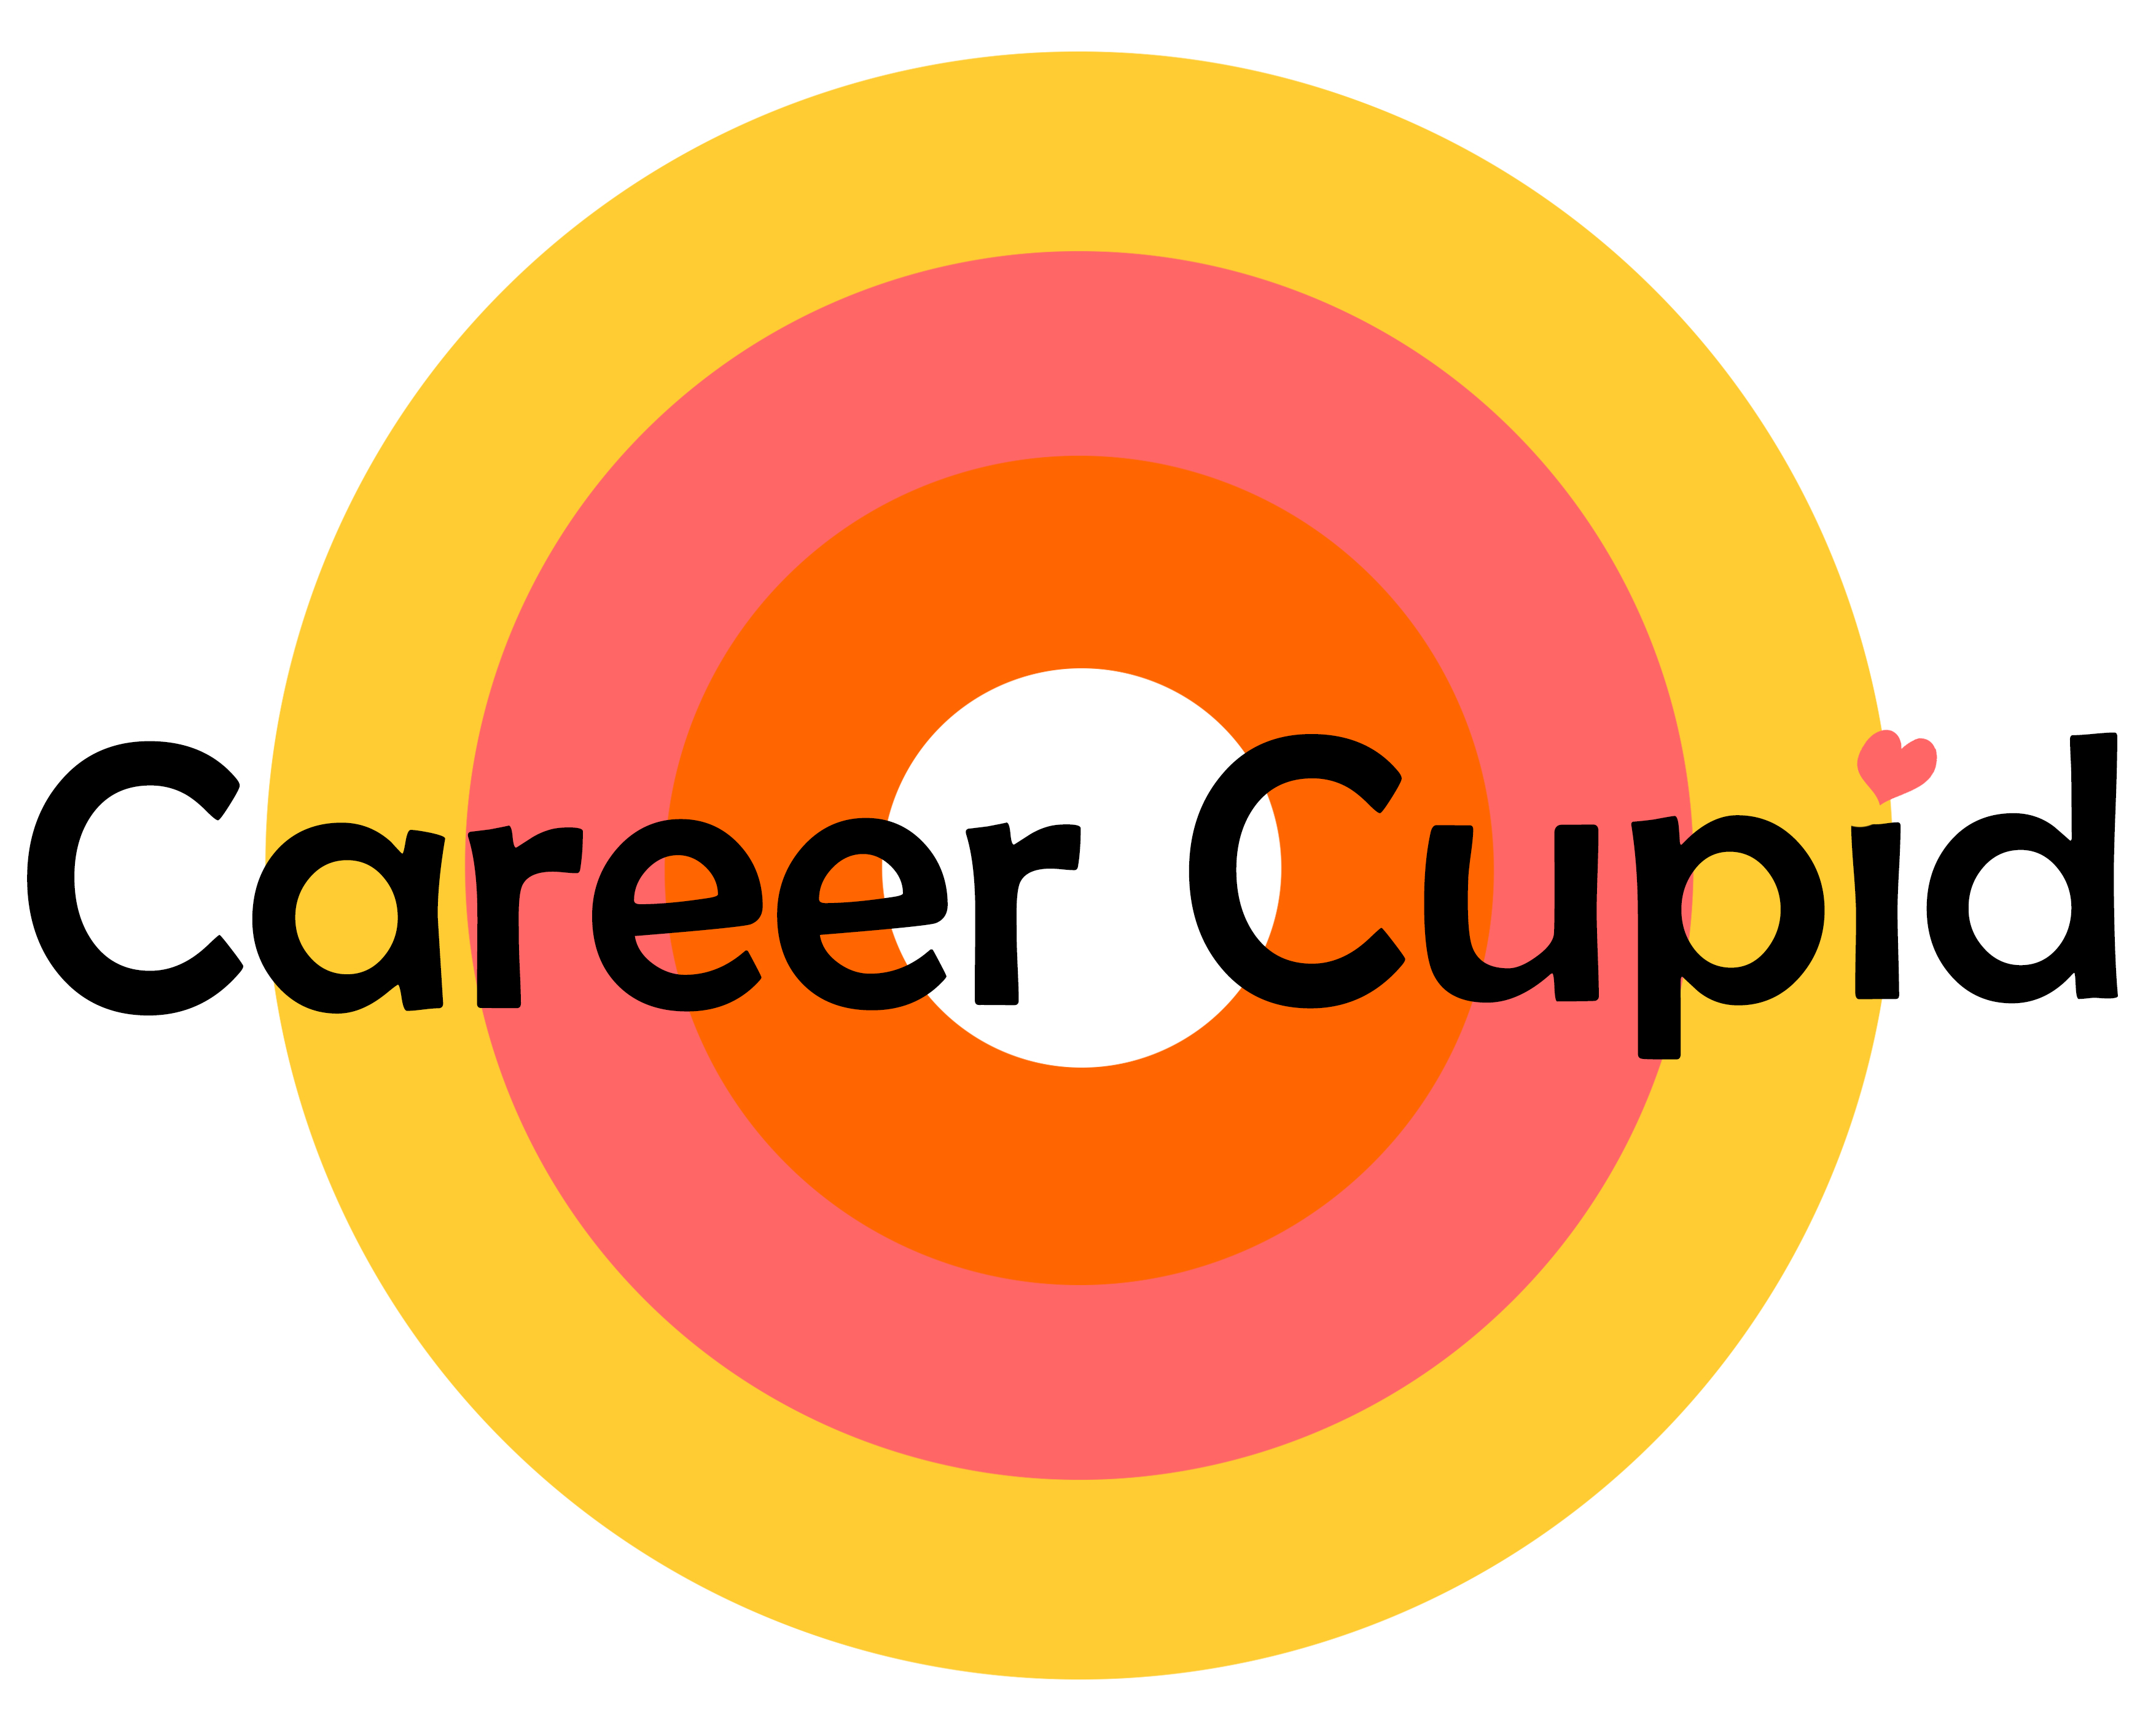 Welcome to Career Cupid